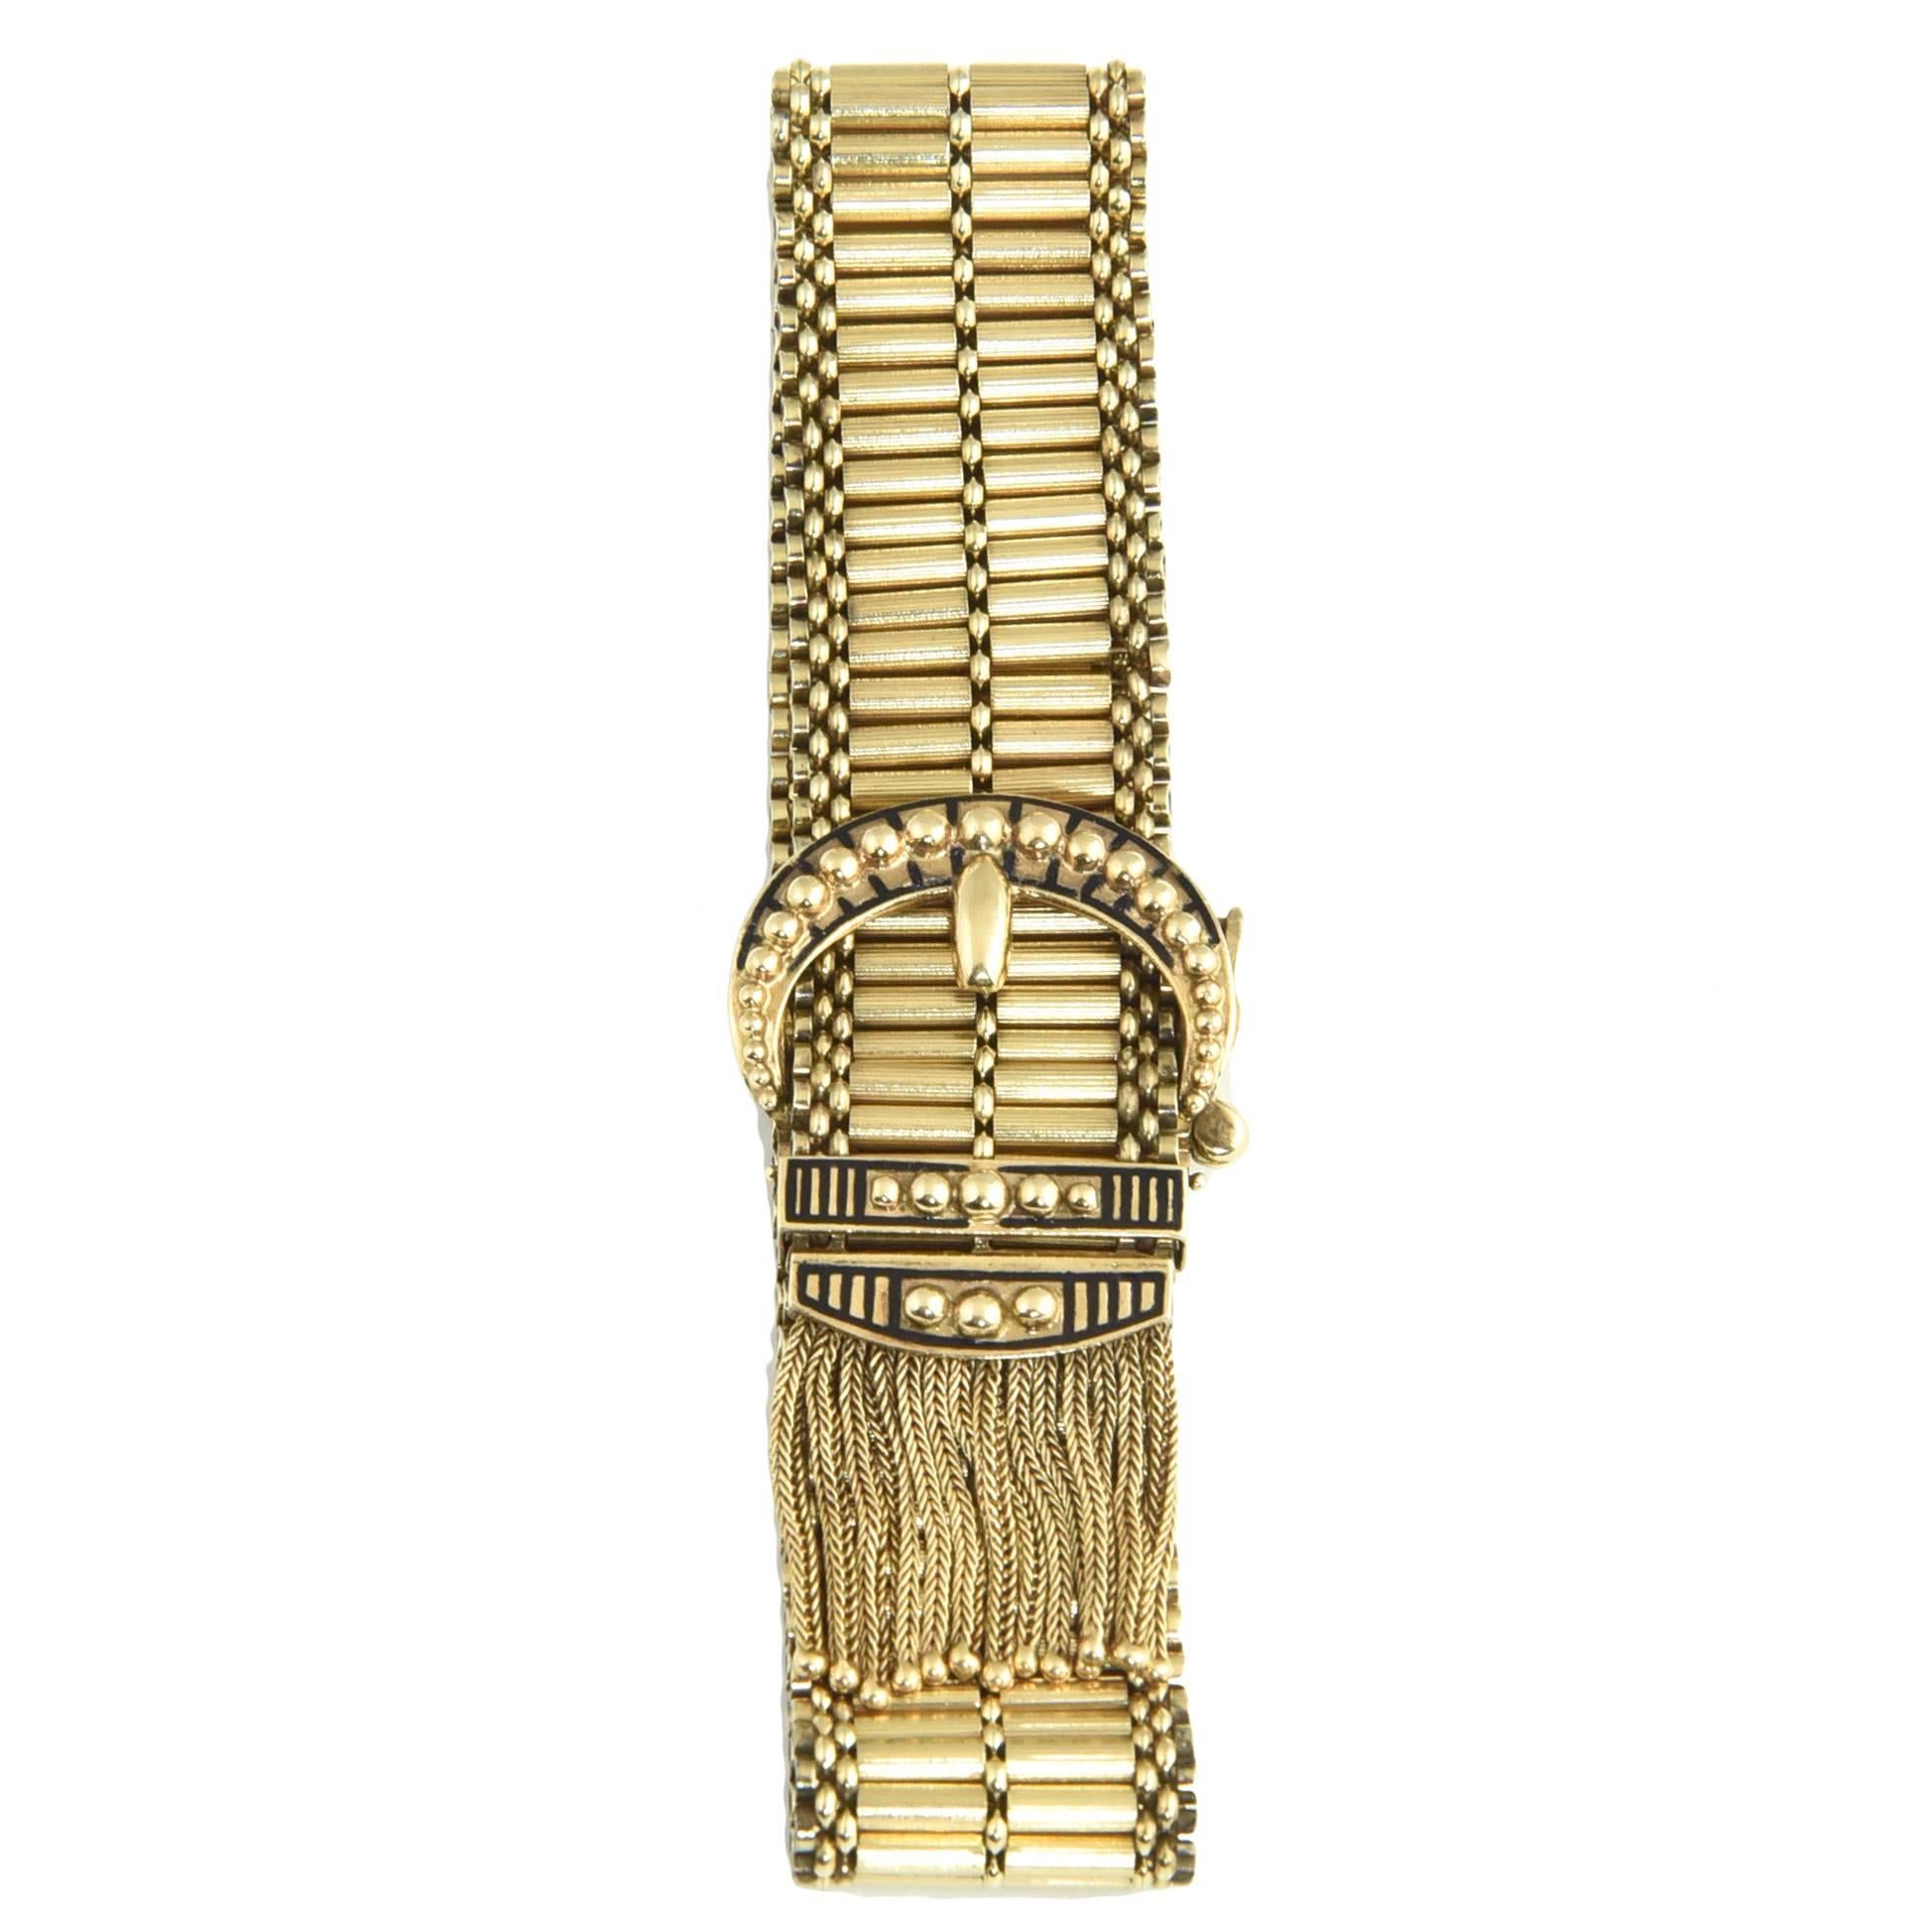 1950s Victorian Revival Gold Buckle Bracelet with Tassels